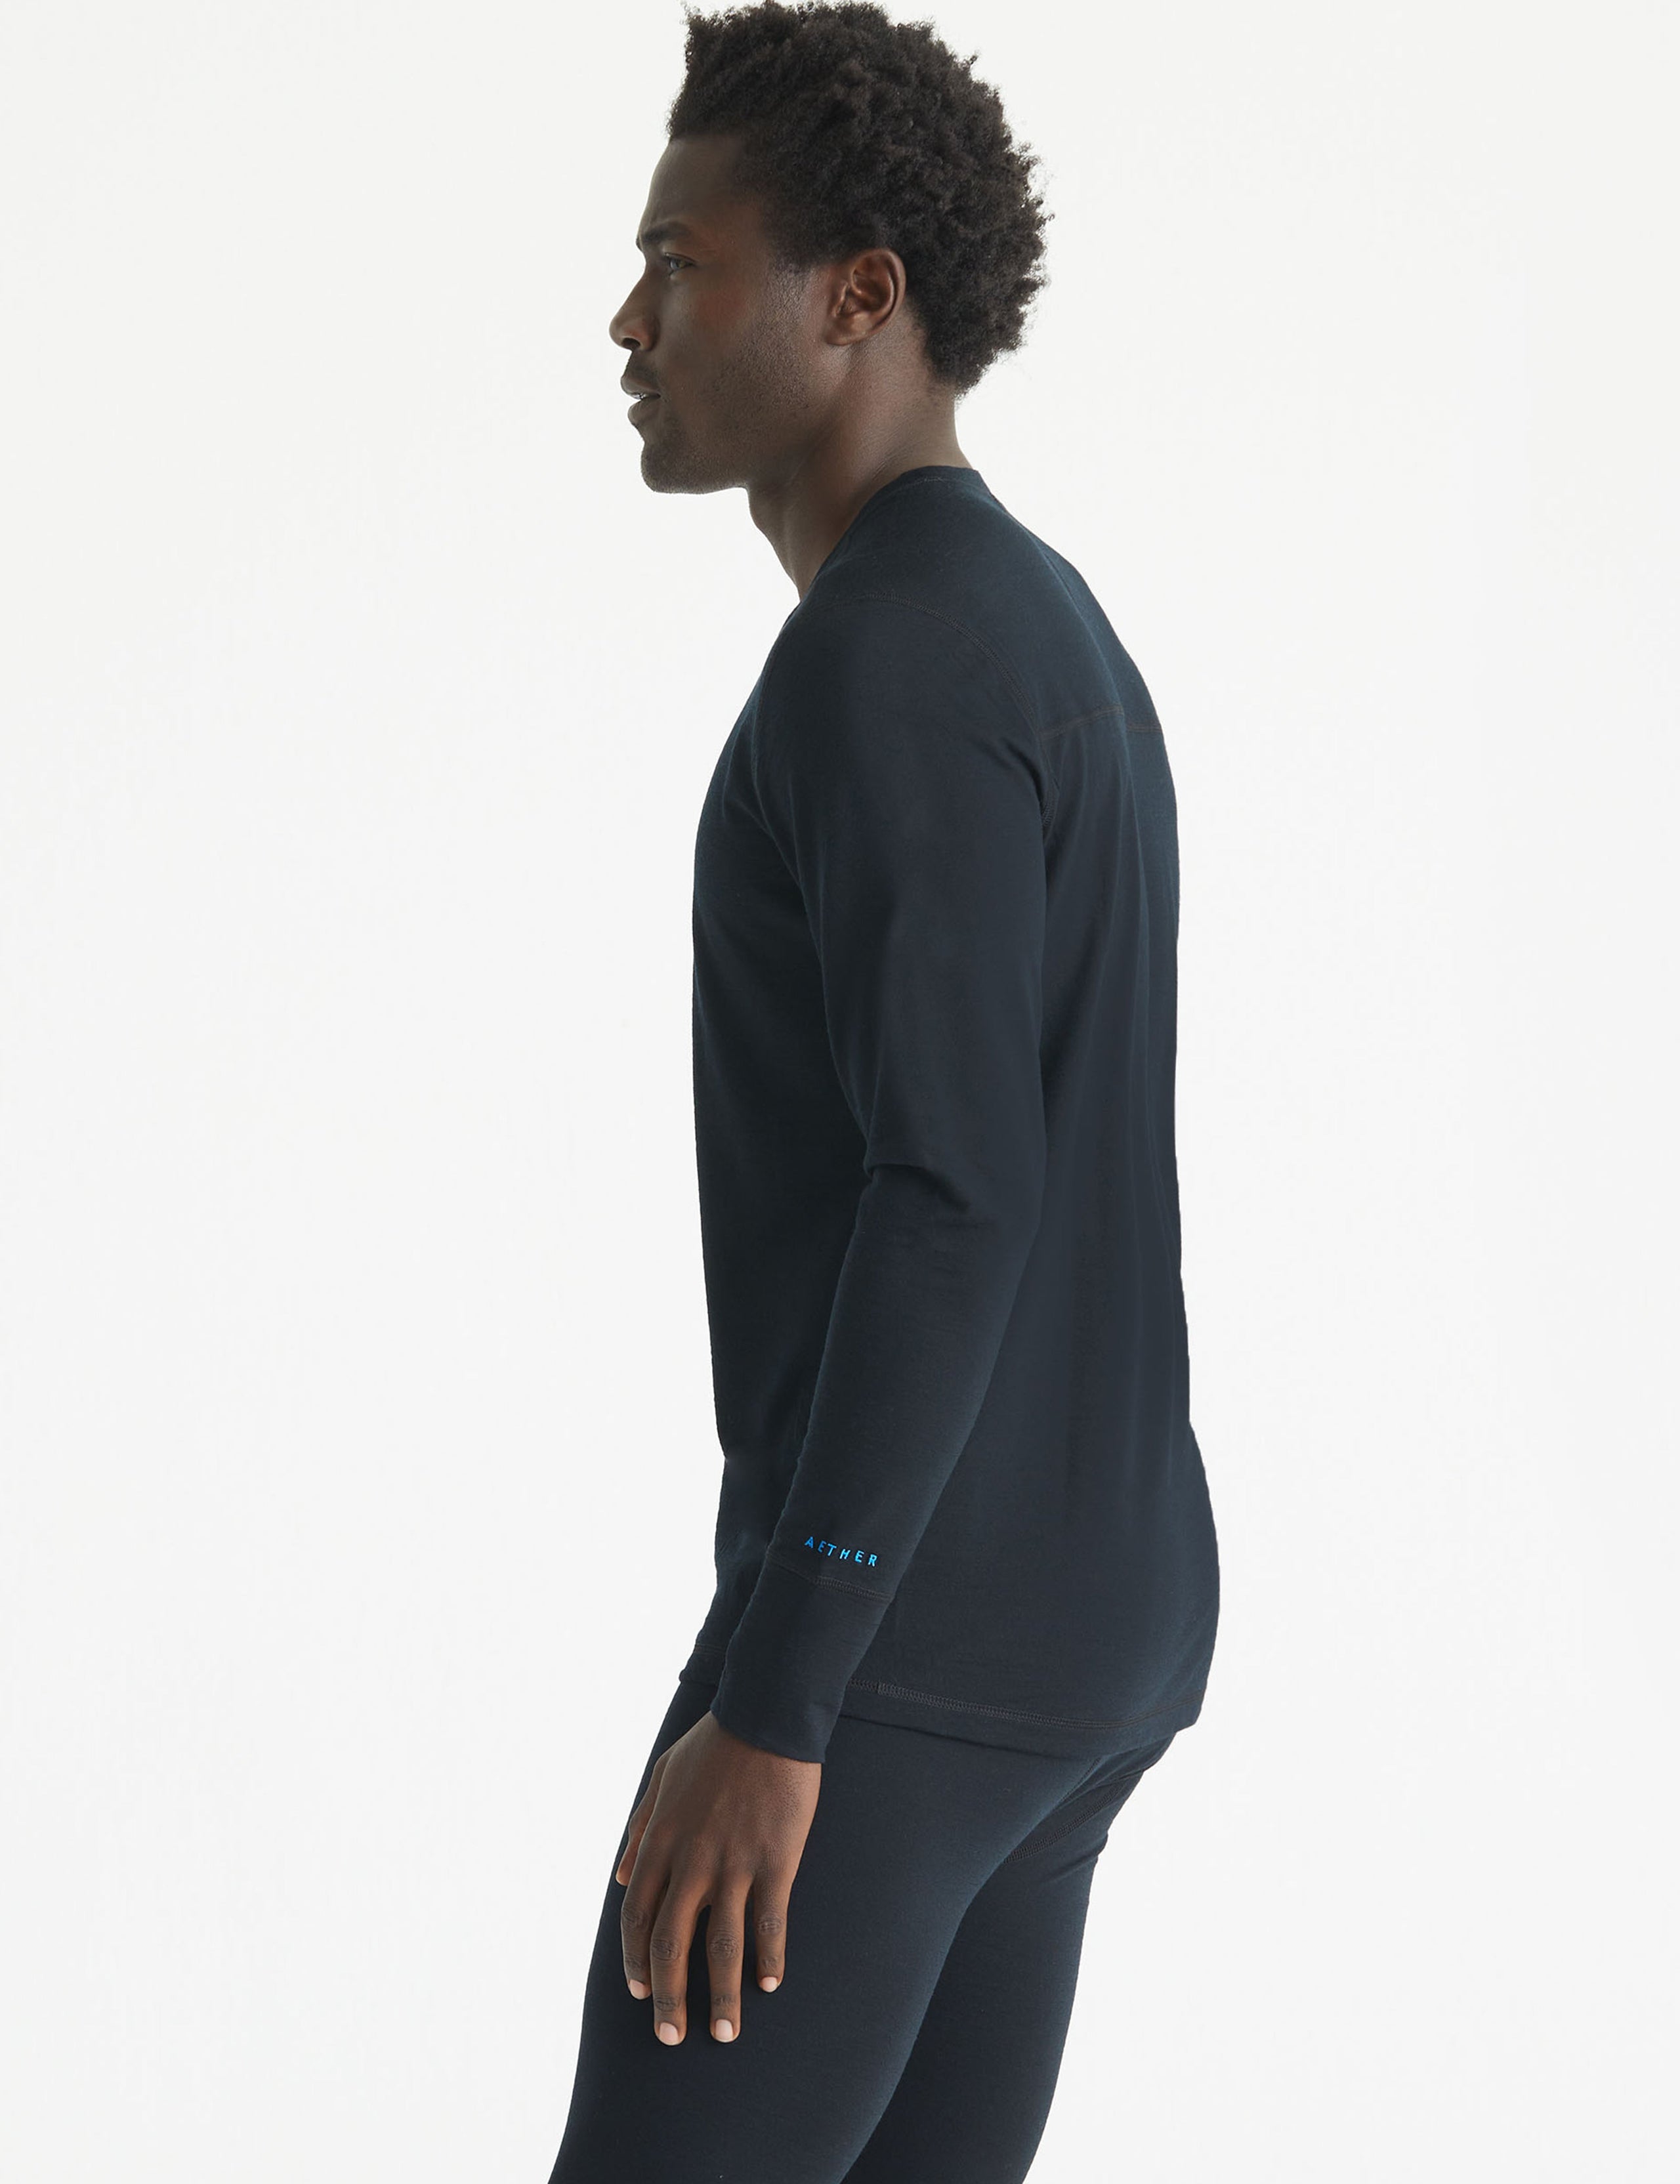 base layer shirt for men from Aether Apparel